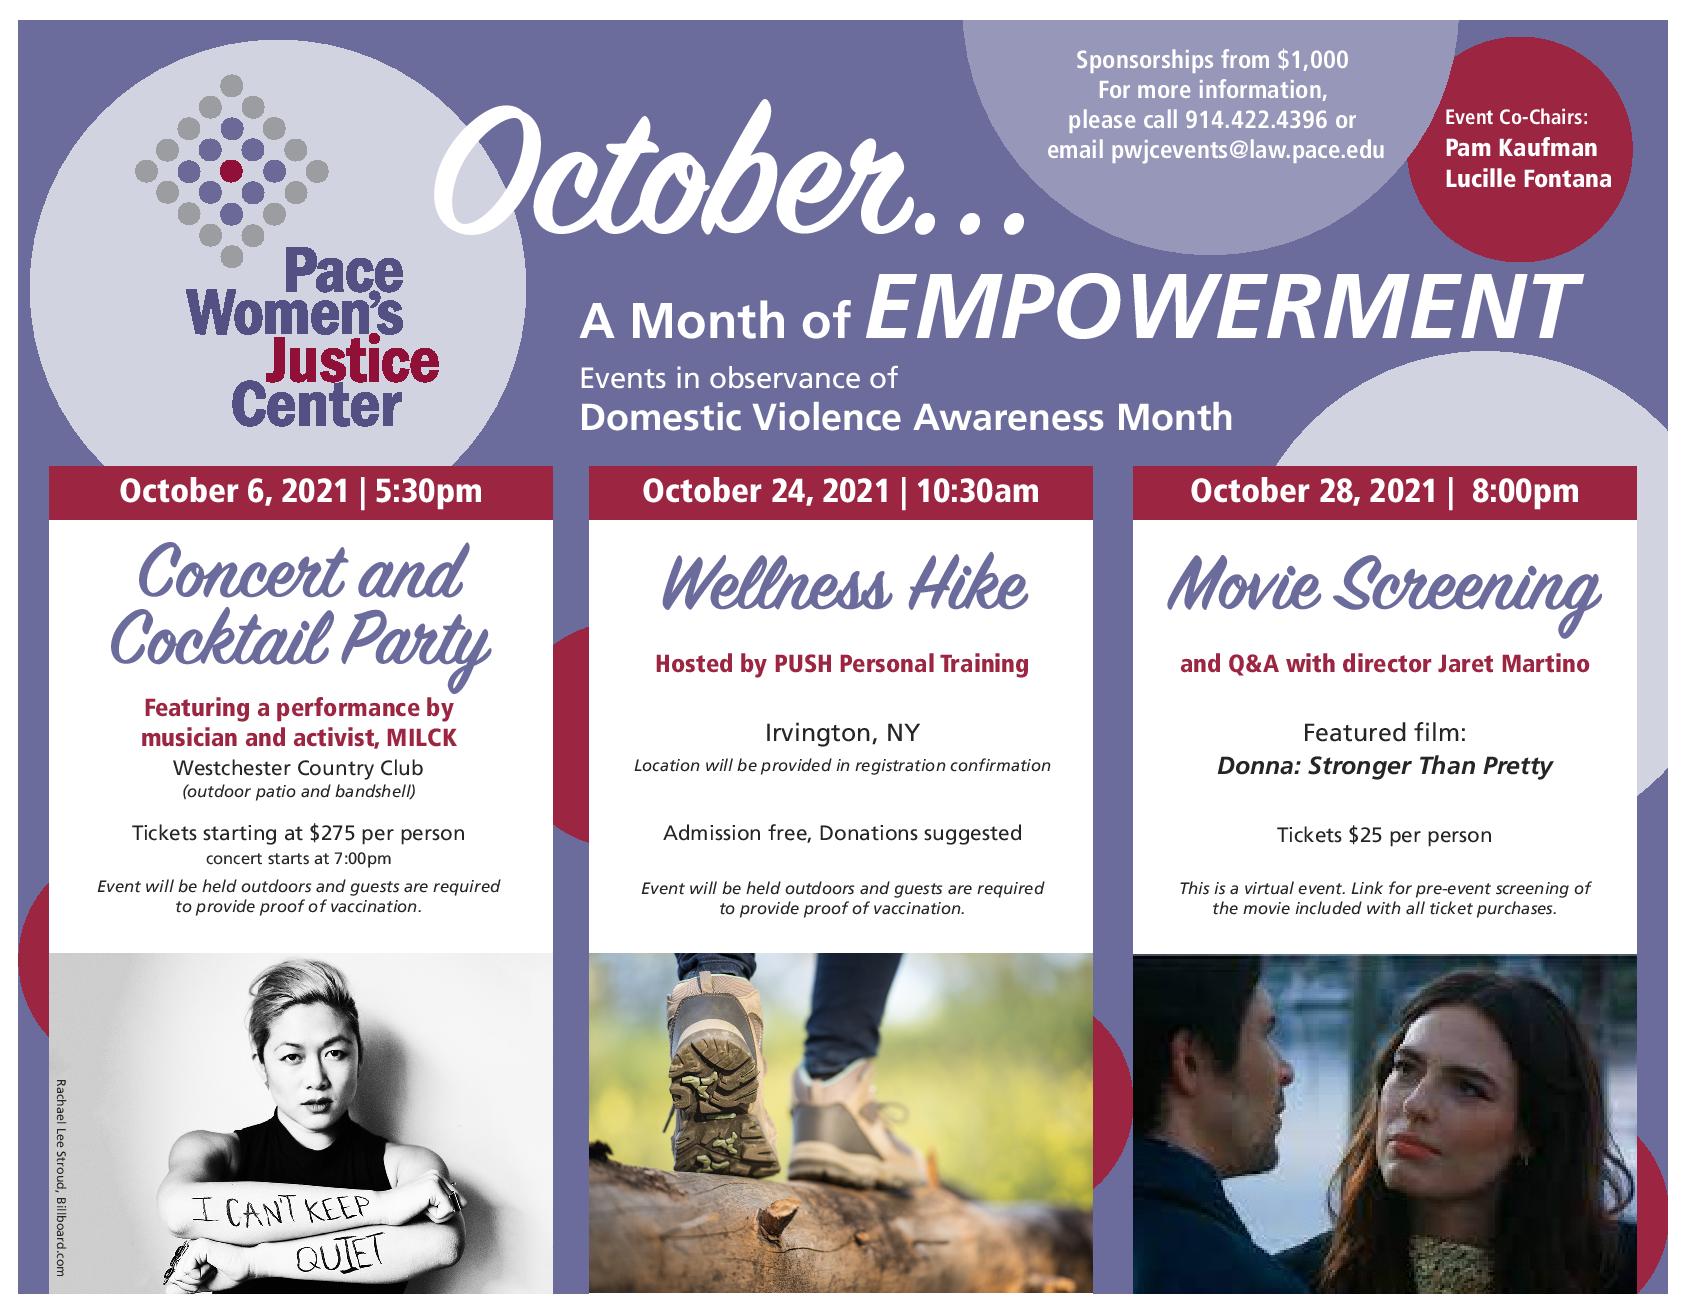 Month of Empowerment - October 2021 Events